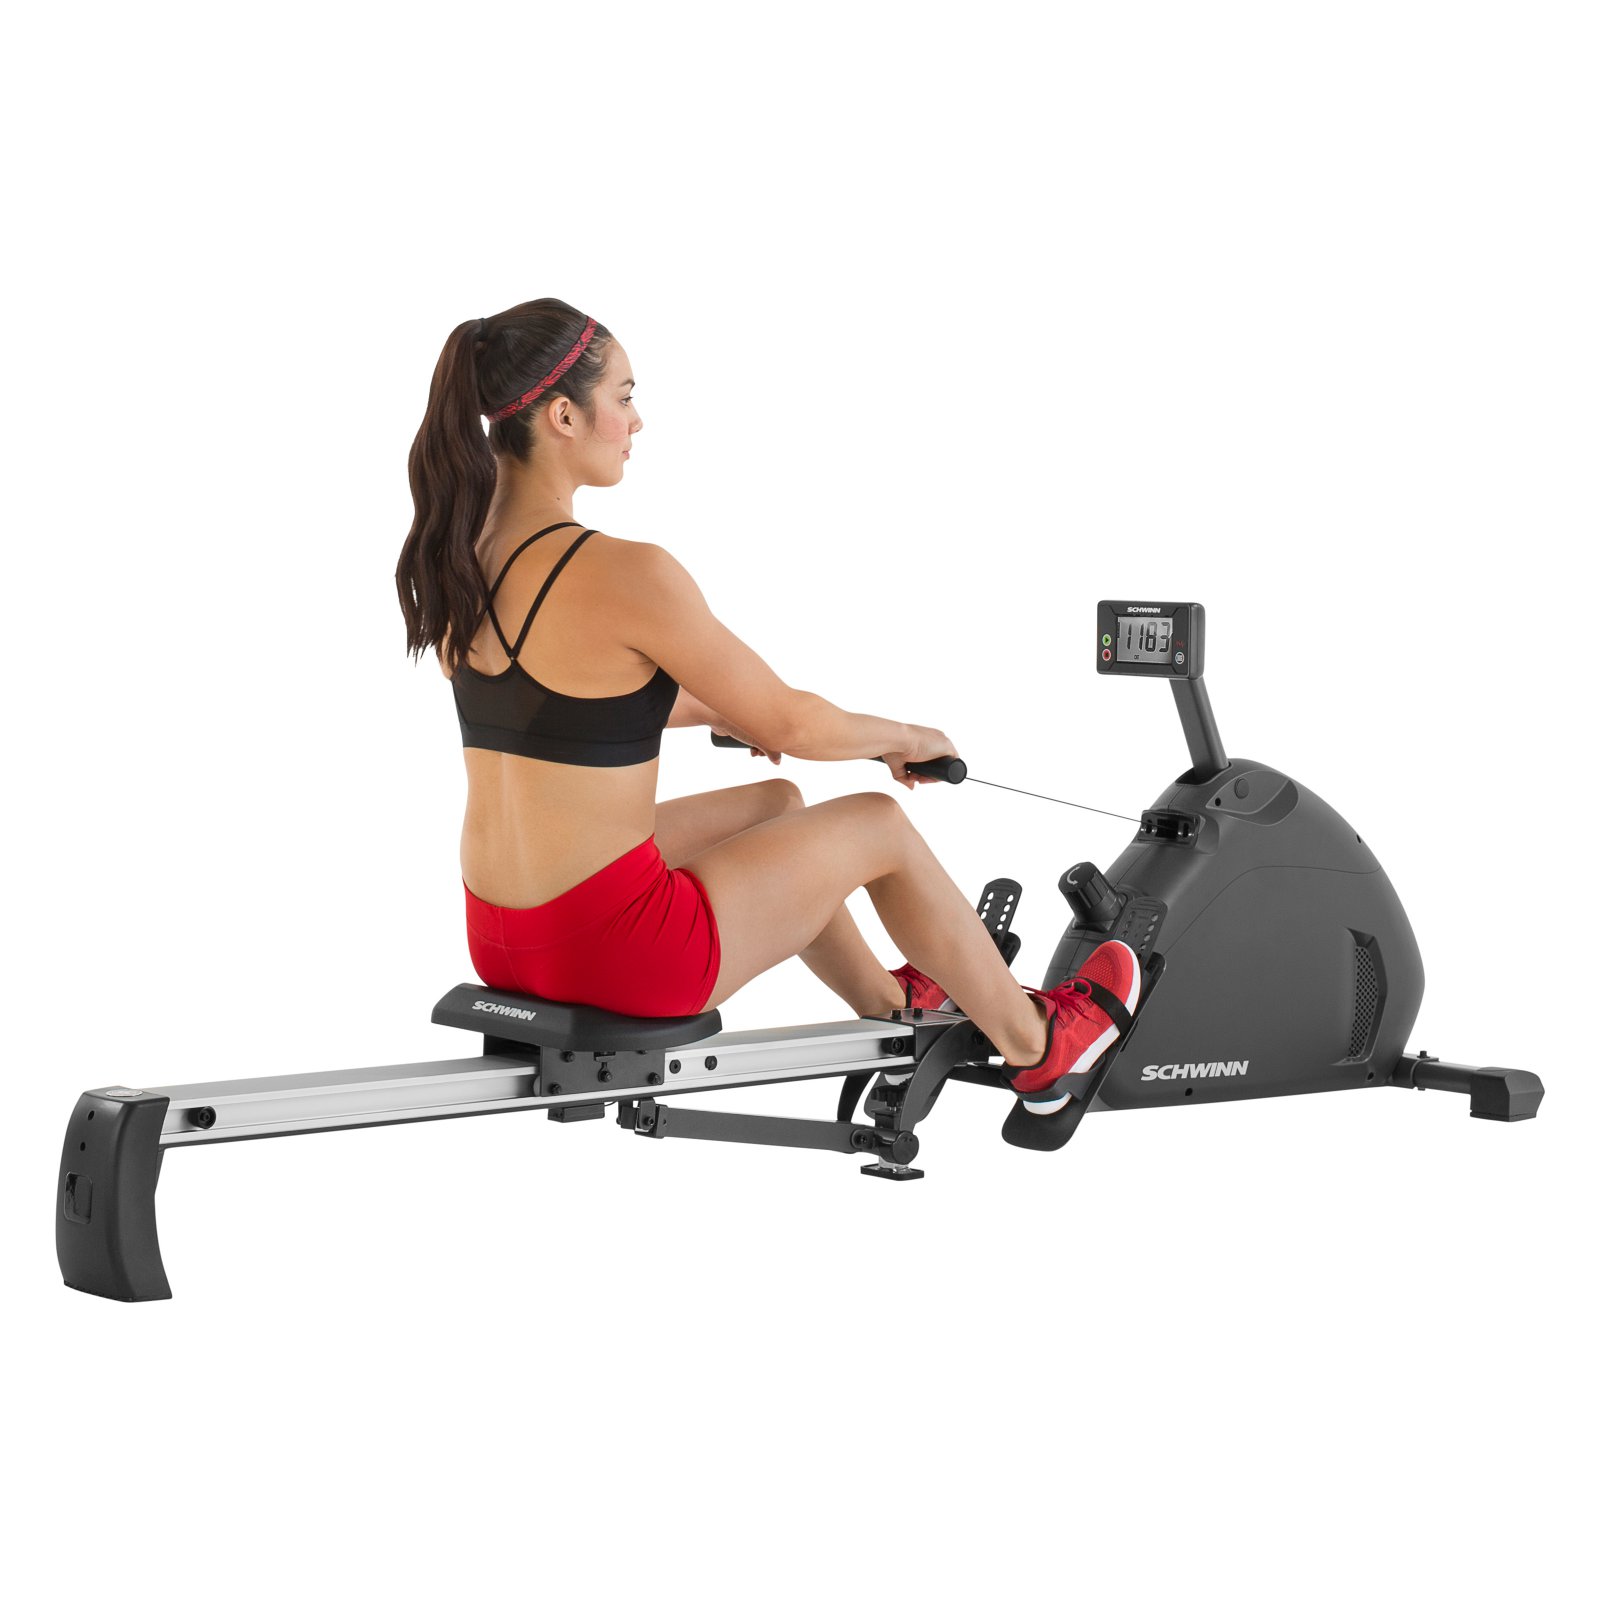 Schwinn Crewmaster Rower with Large Adjustable LCD Display + 10-year Warranty